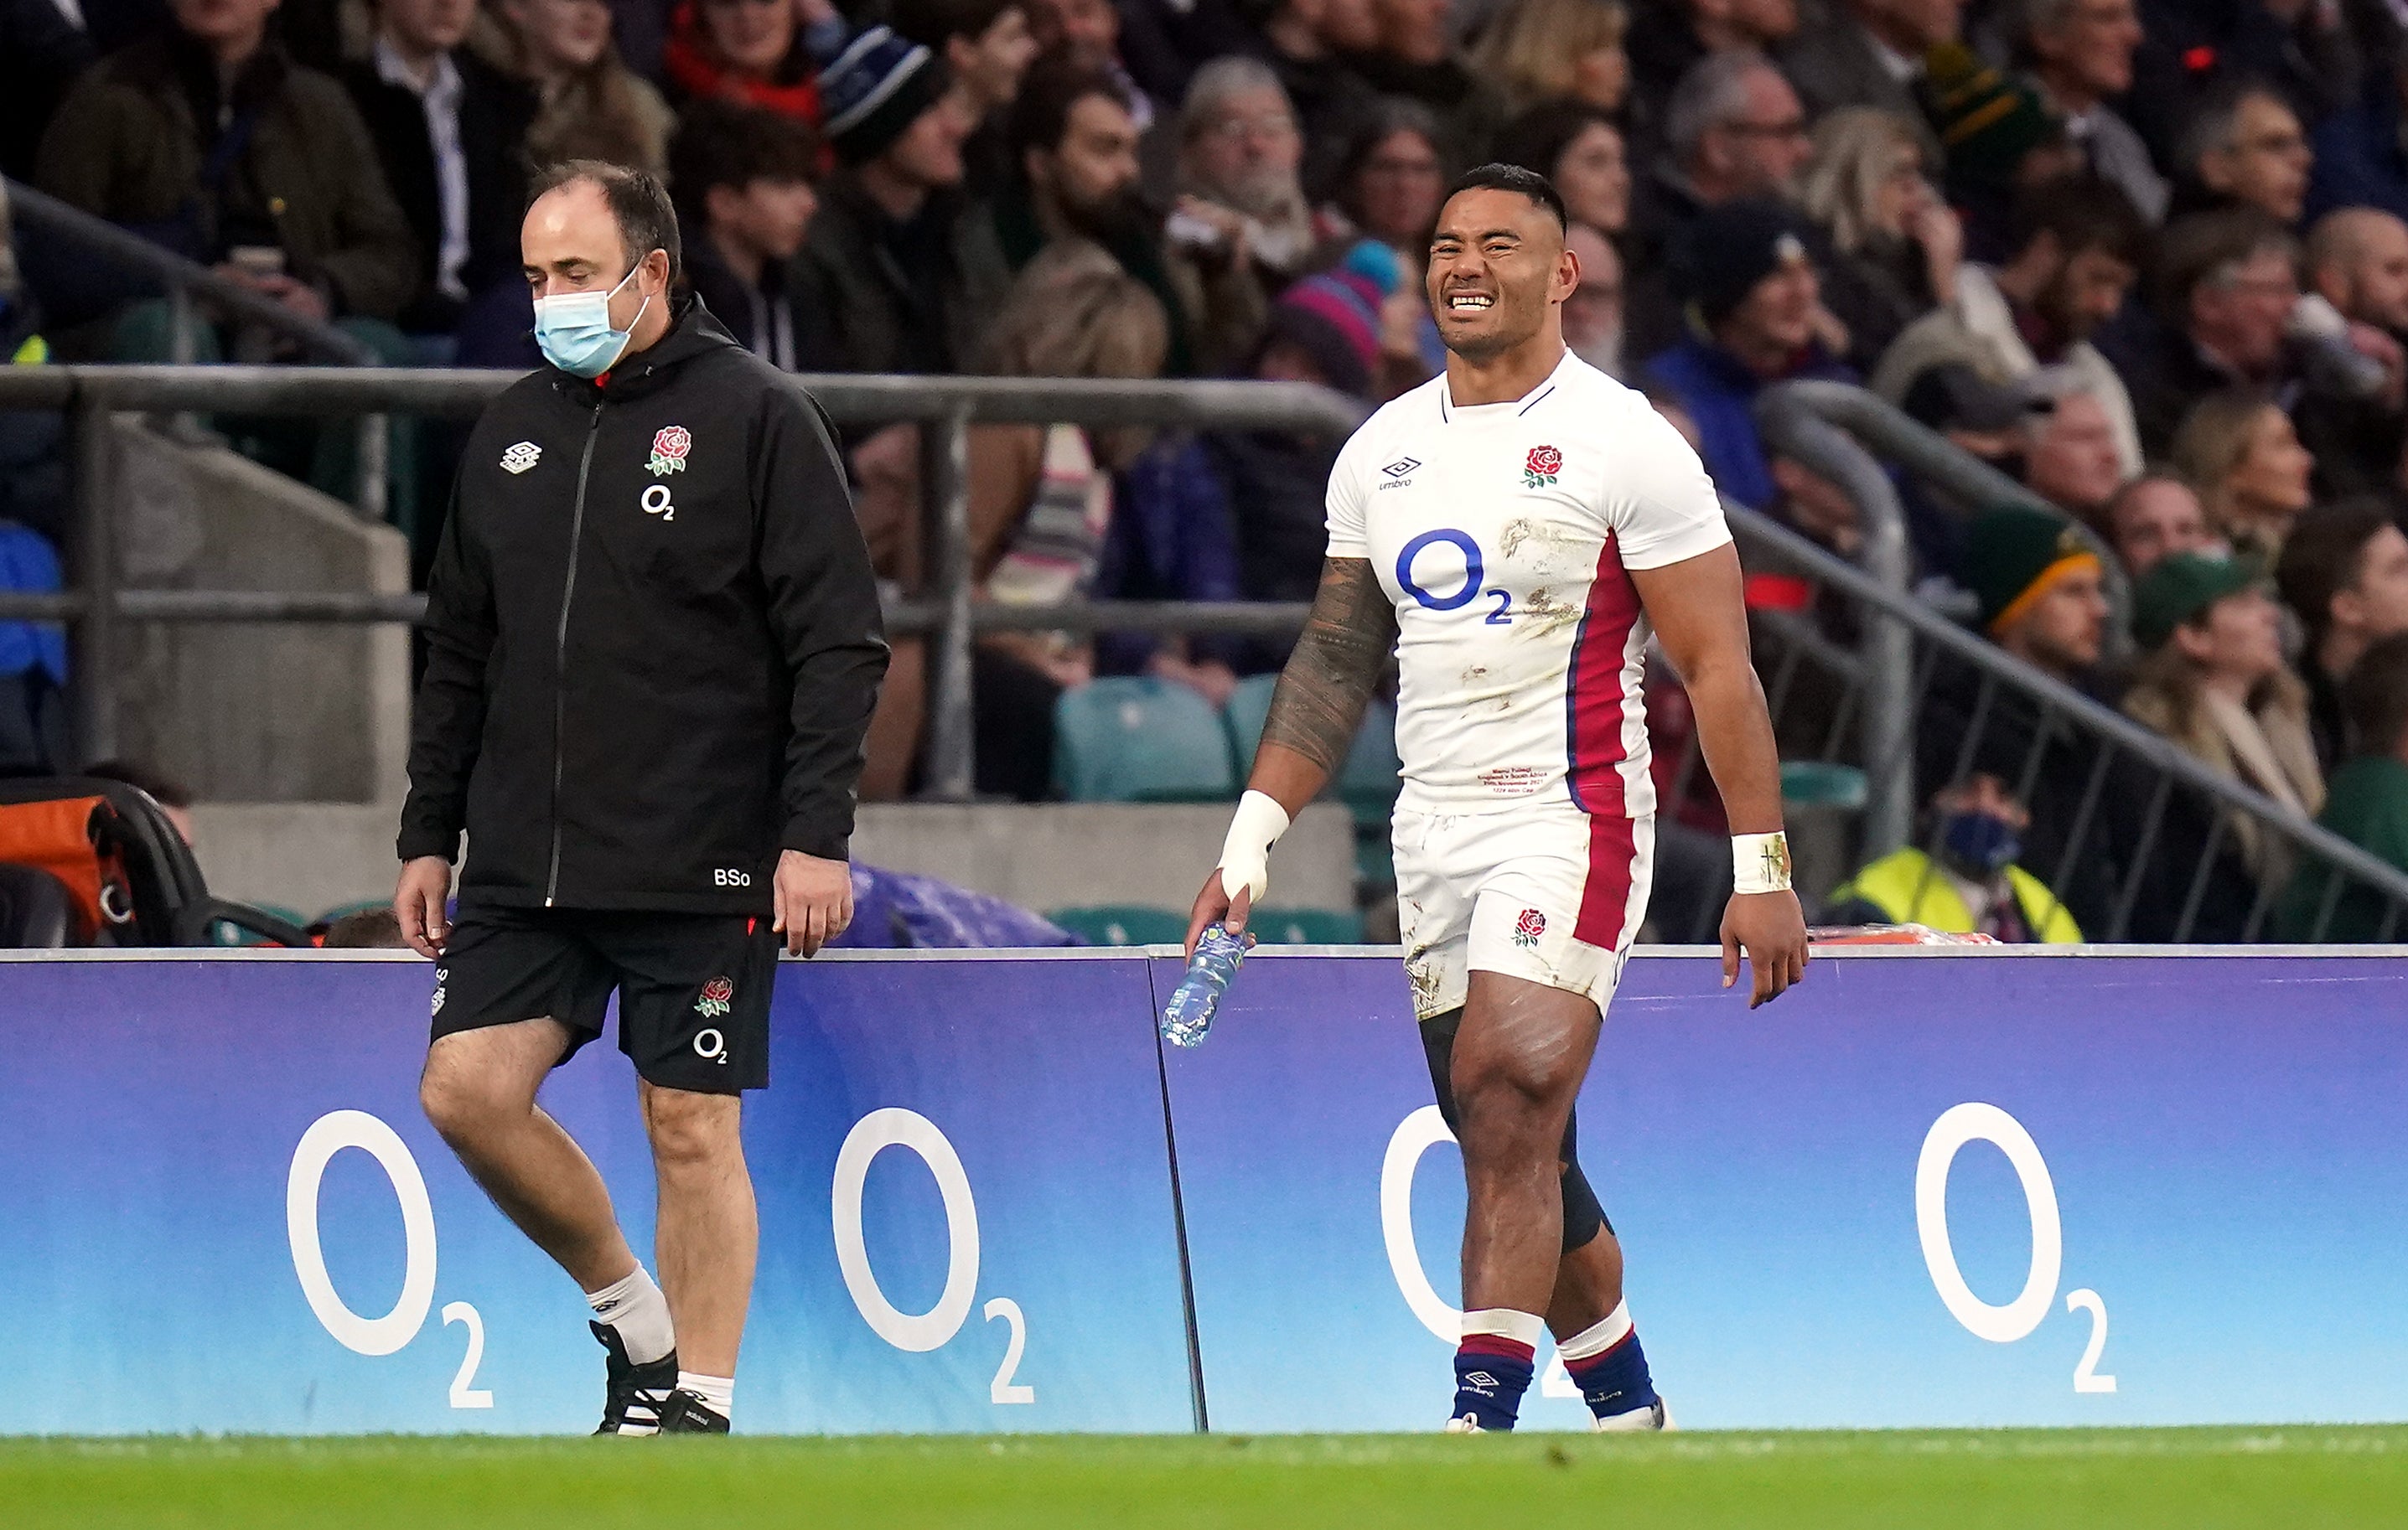 Manu Tuilagi has had a frustrating spell with injuries